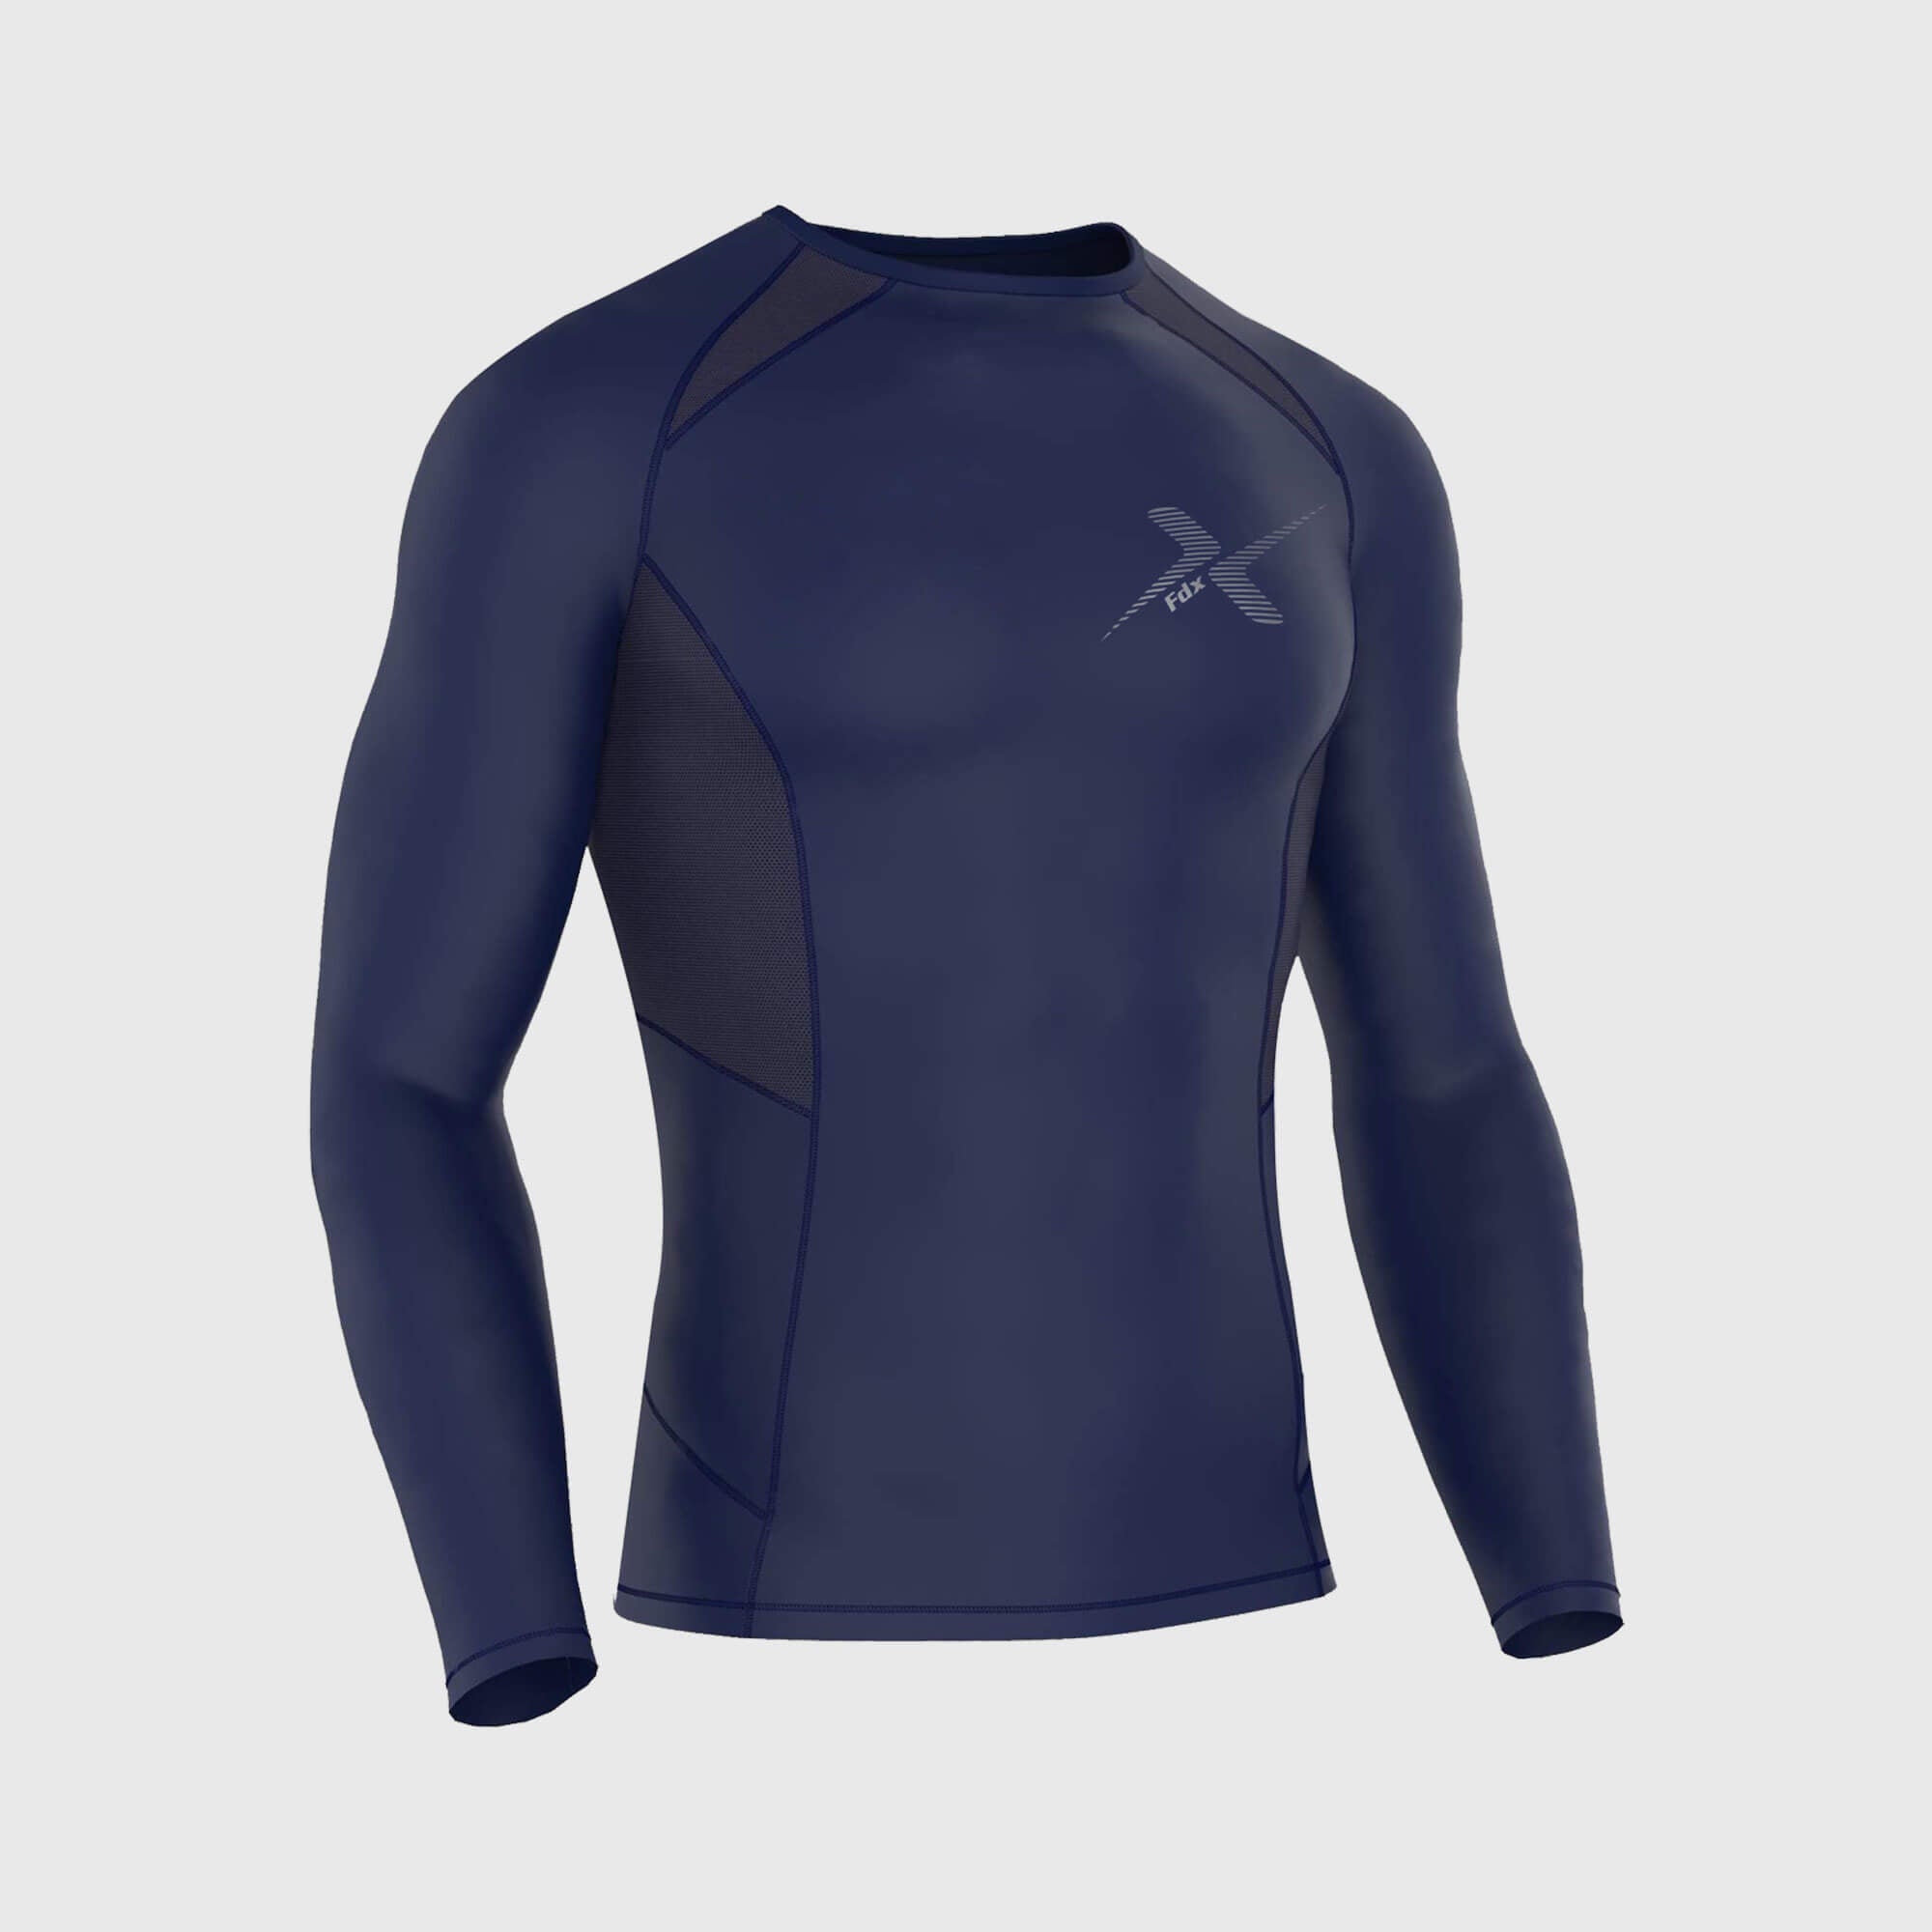 Fdx Mens Navy Blue Long Sleeve Compression Top & Compression Tights Base Layer Gym Training Jogging Yoga Fitness Body Wear - Recoil